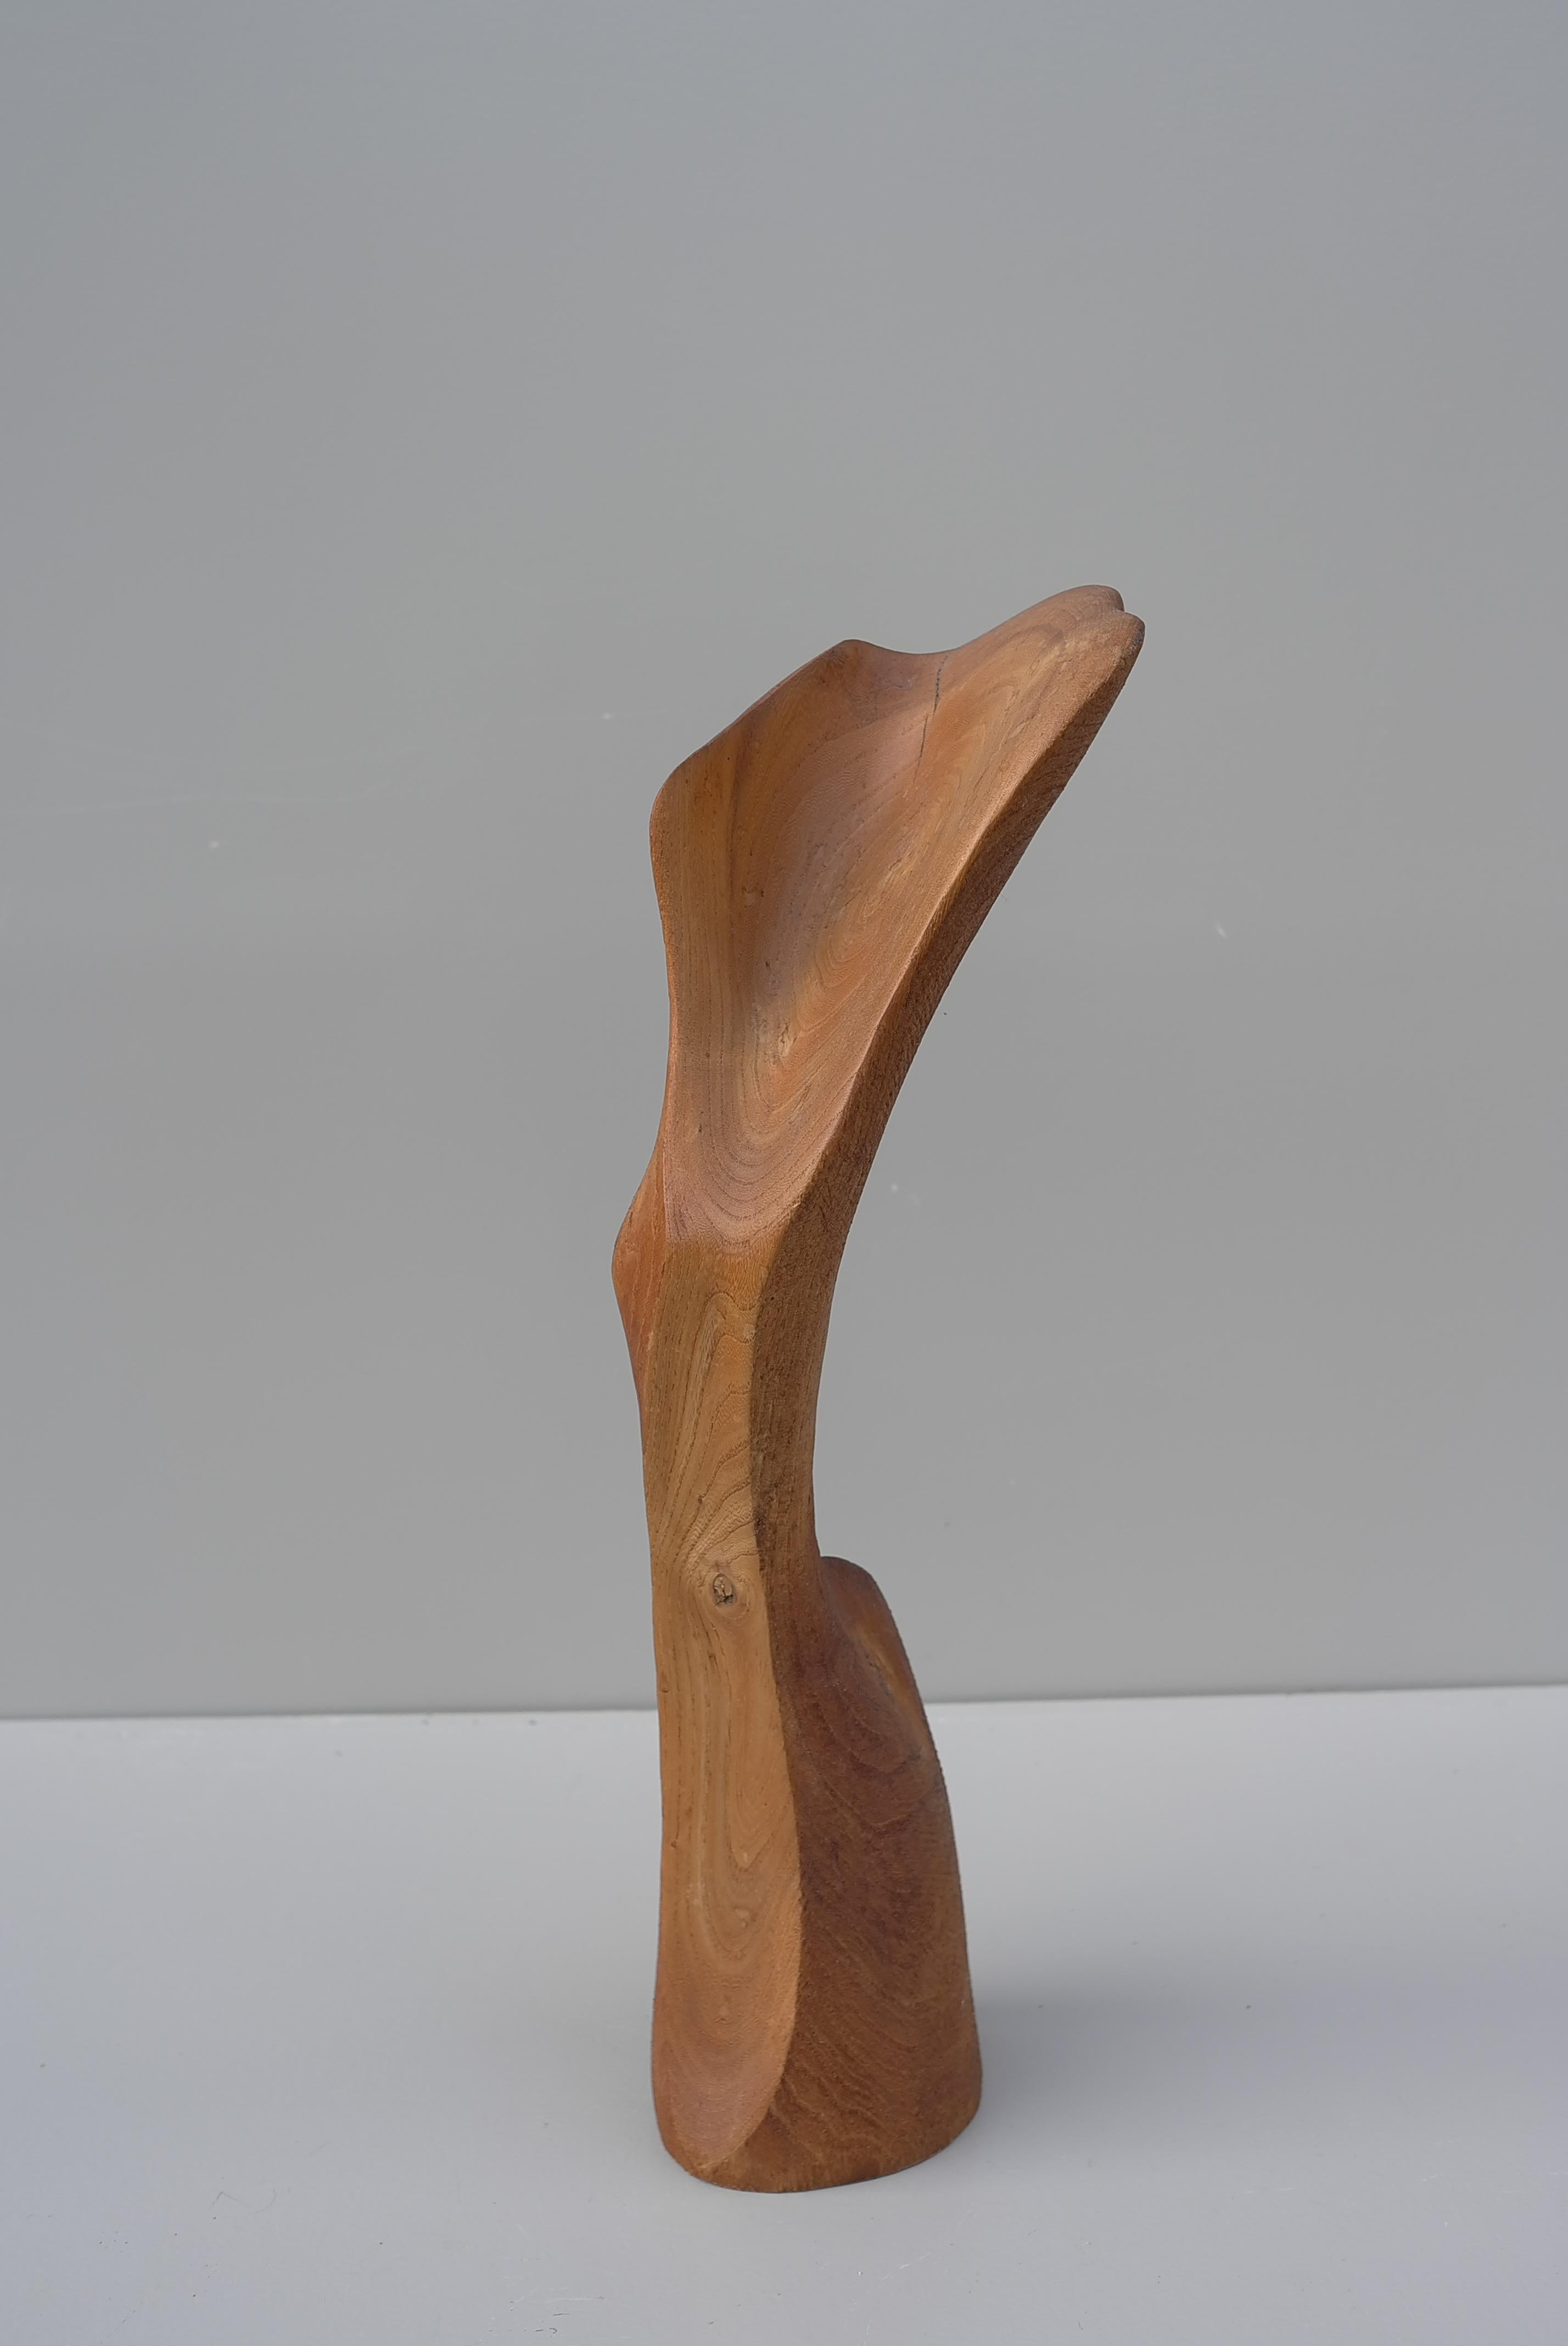 Dutch  Abstract Mid-Century Modern Organic Wooden Sculpture, 1960's For Sale